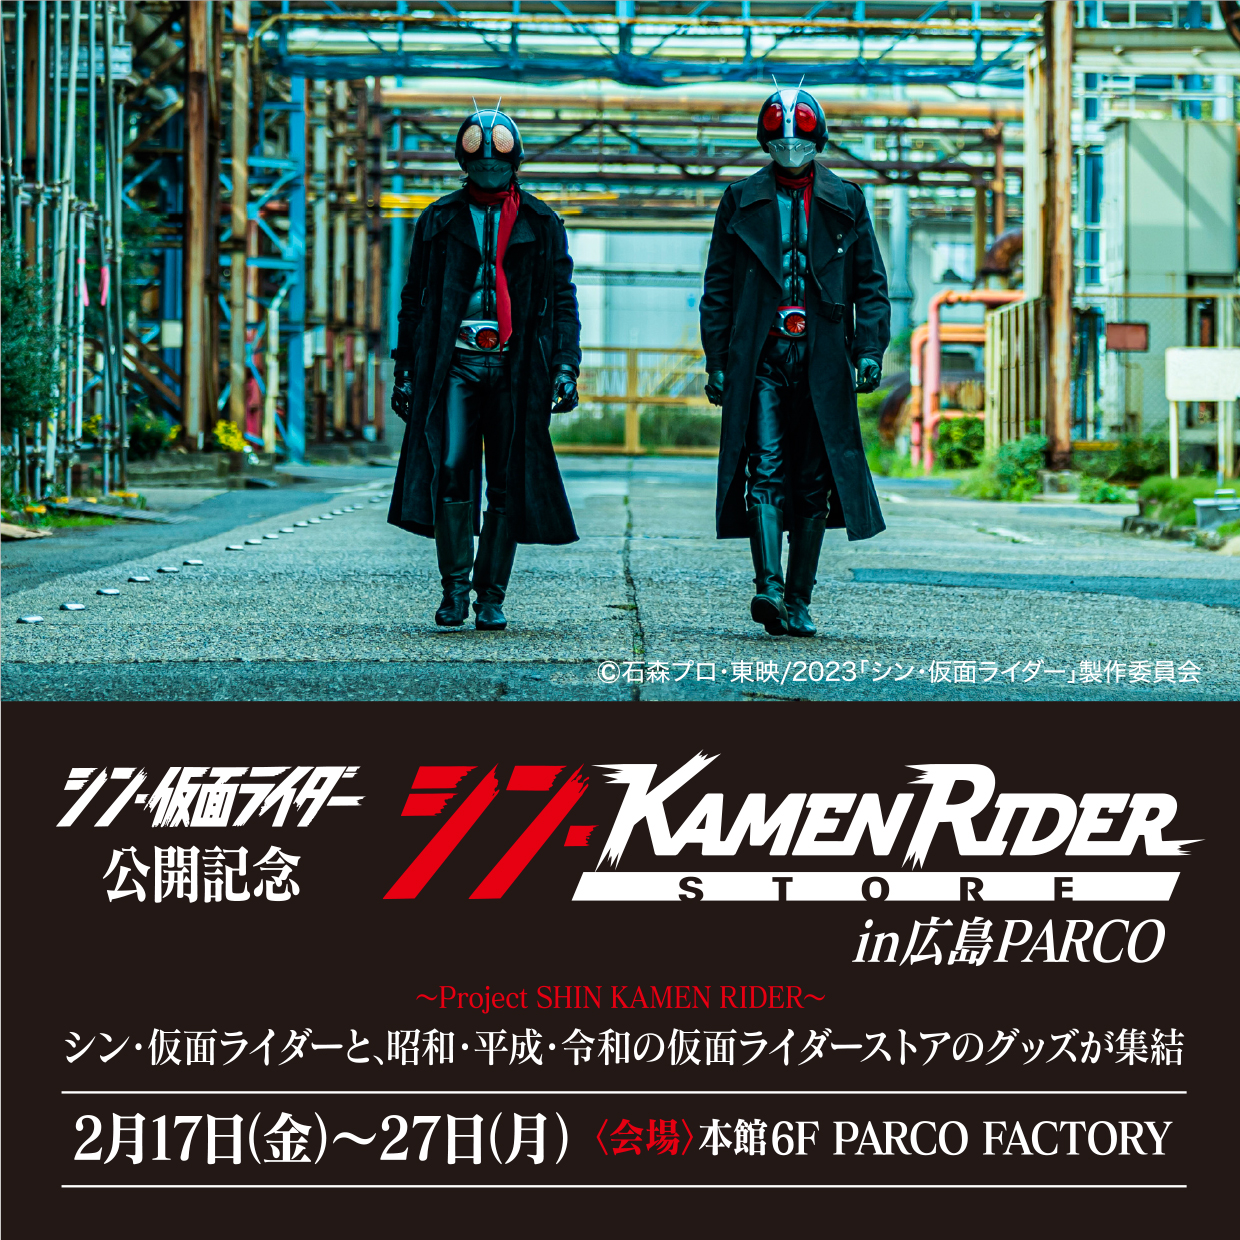 Project SHIN KAMEN RIDER ～ 23年3月『シン・仮面ライダー」公開記念シン・仮面ライダーストア in 広島PARCO